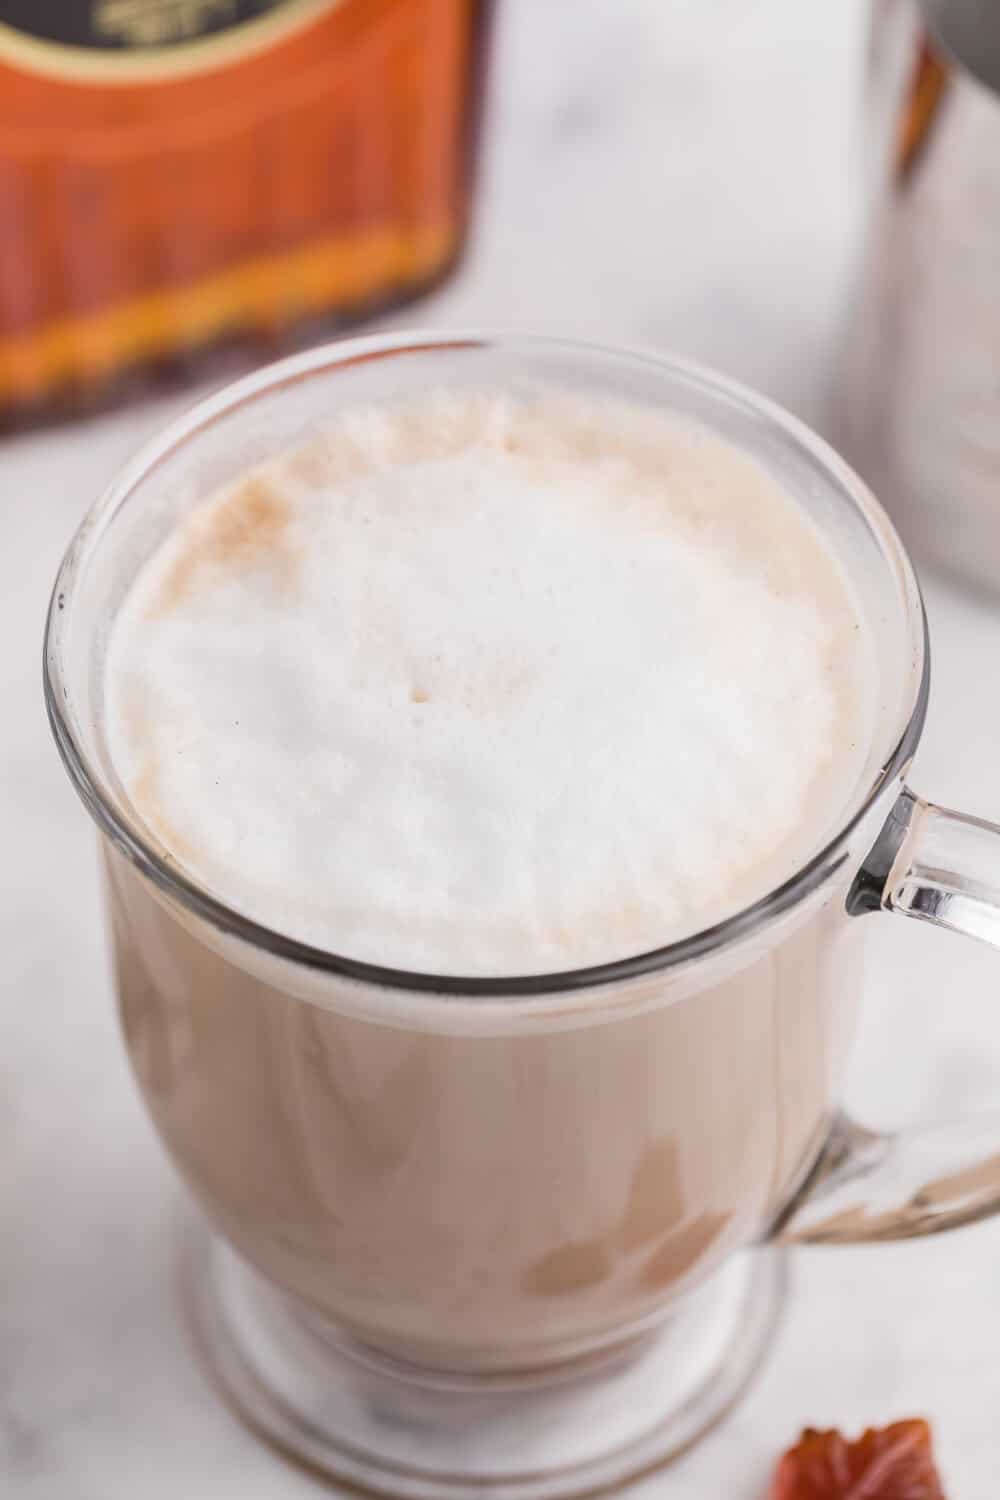 Maple Latte - What could be more Canadian than a sweet maple flavoured latte? This is the perfect afternoon treat when you are craving a warm sweet drink!